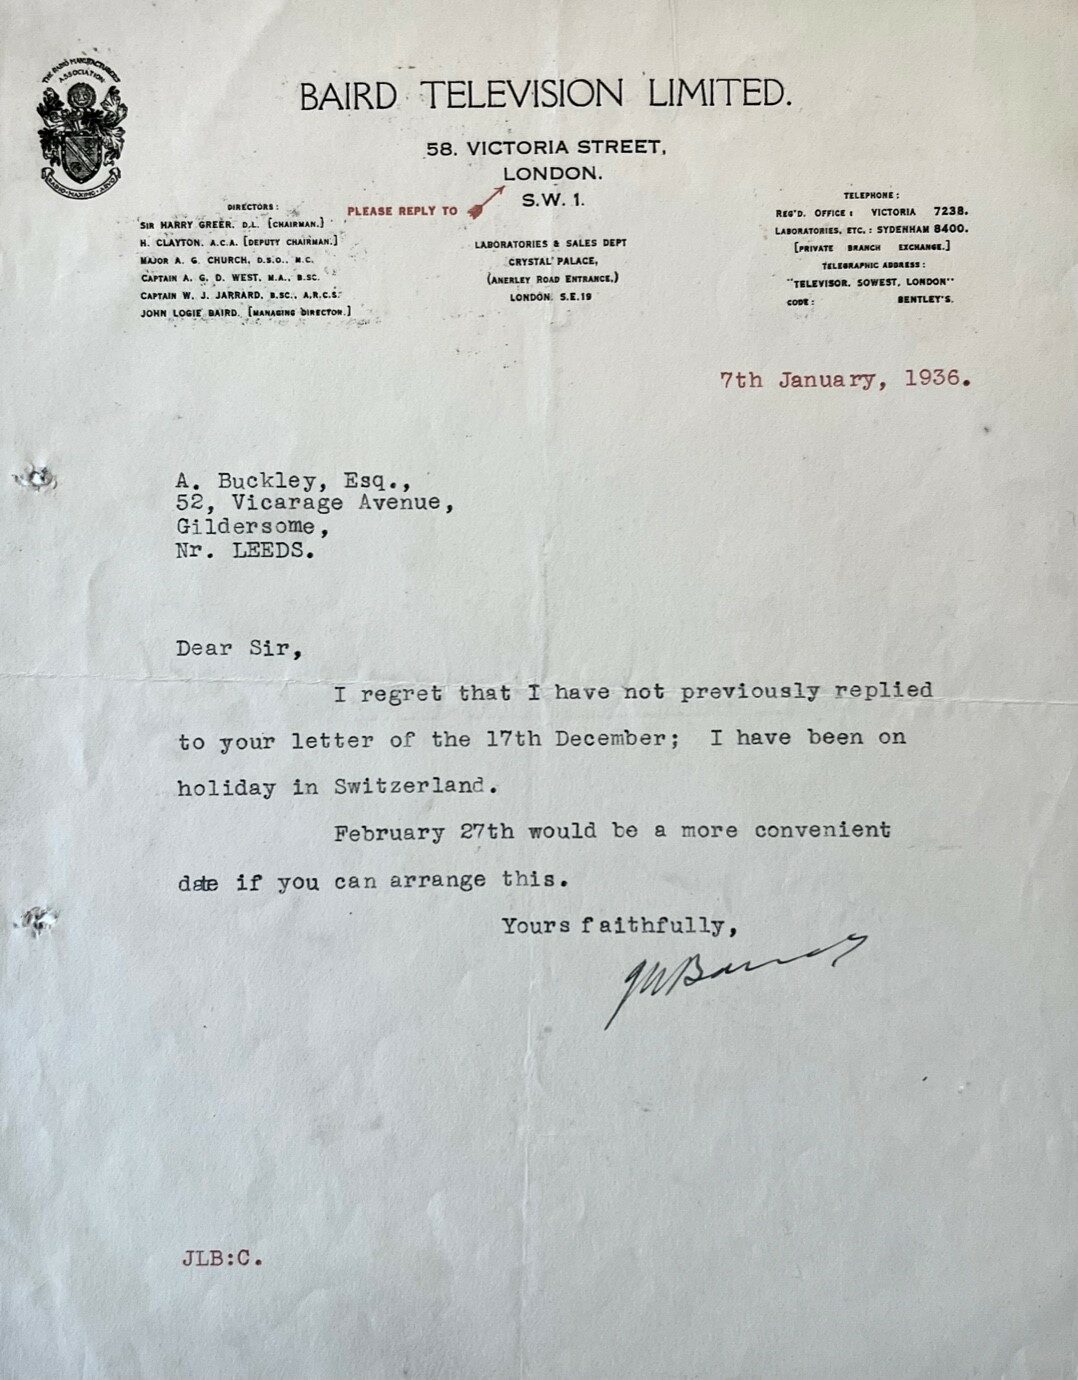 Rare Letter by the Inventor of Television